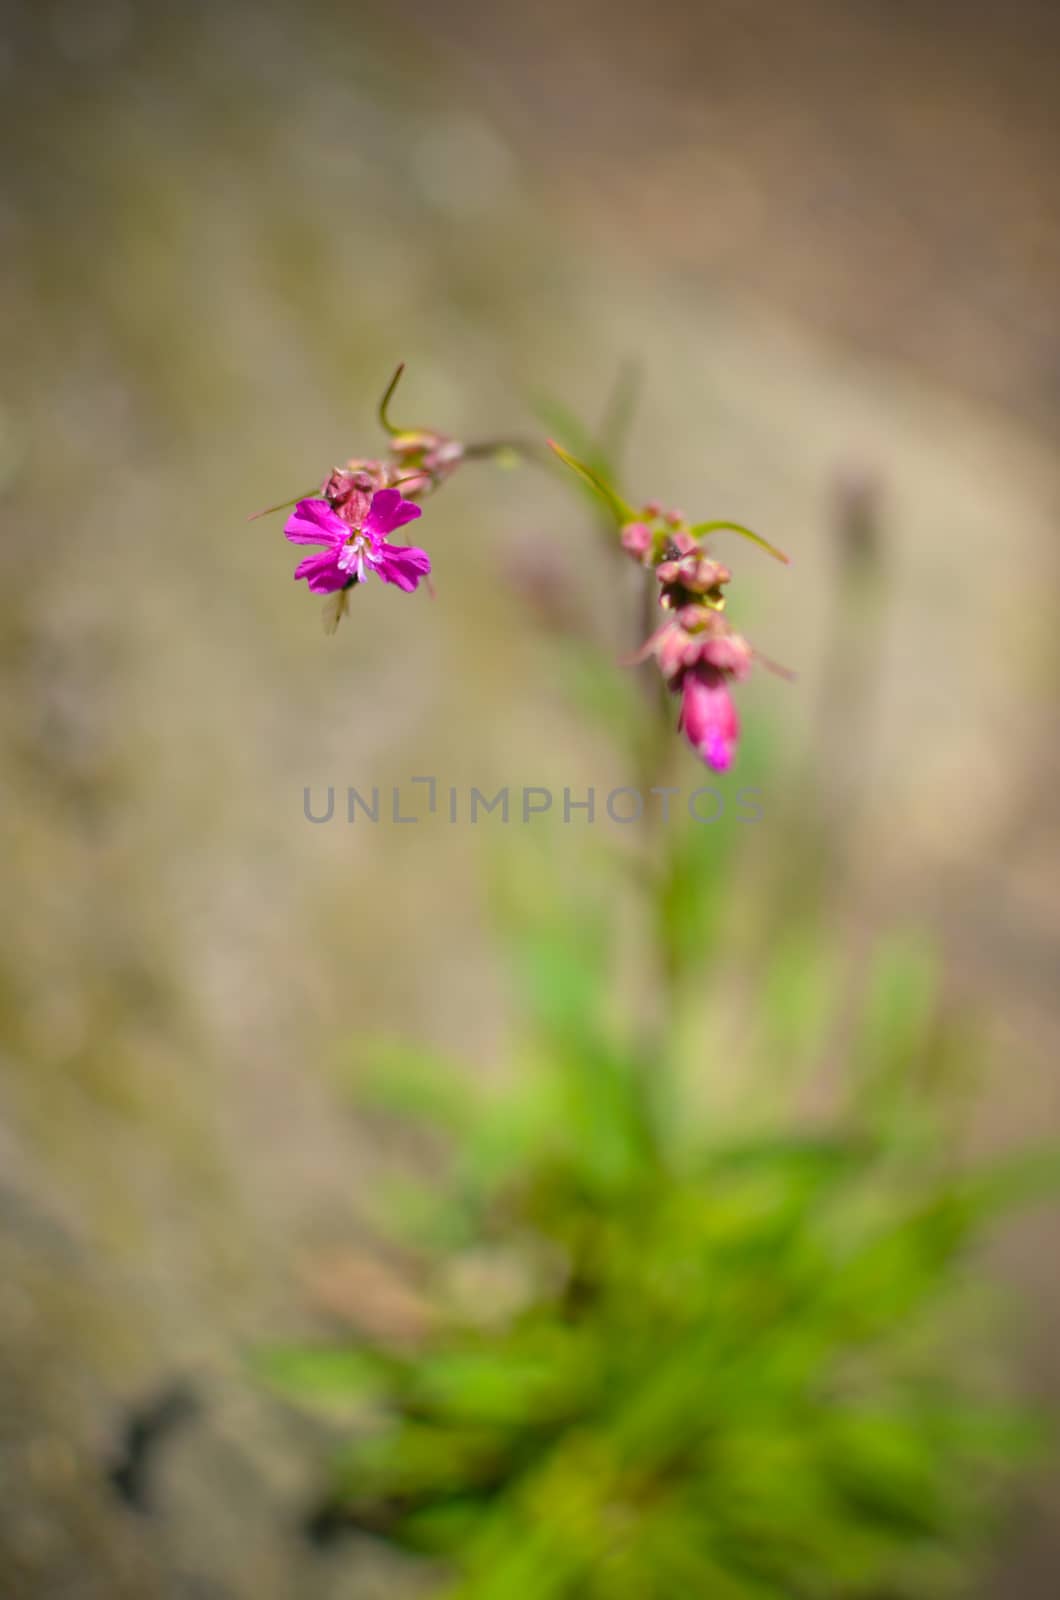 The grass and pink flower by kimbo-bo